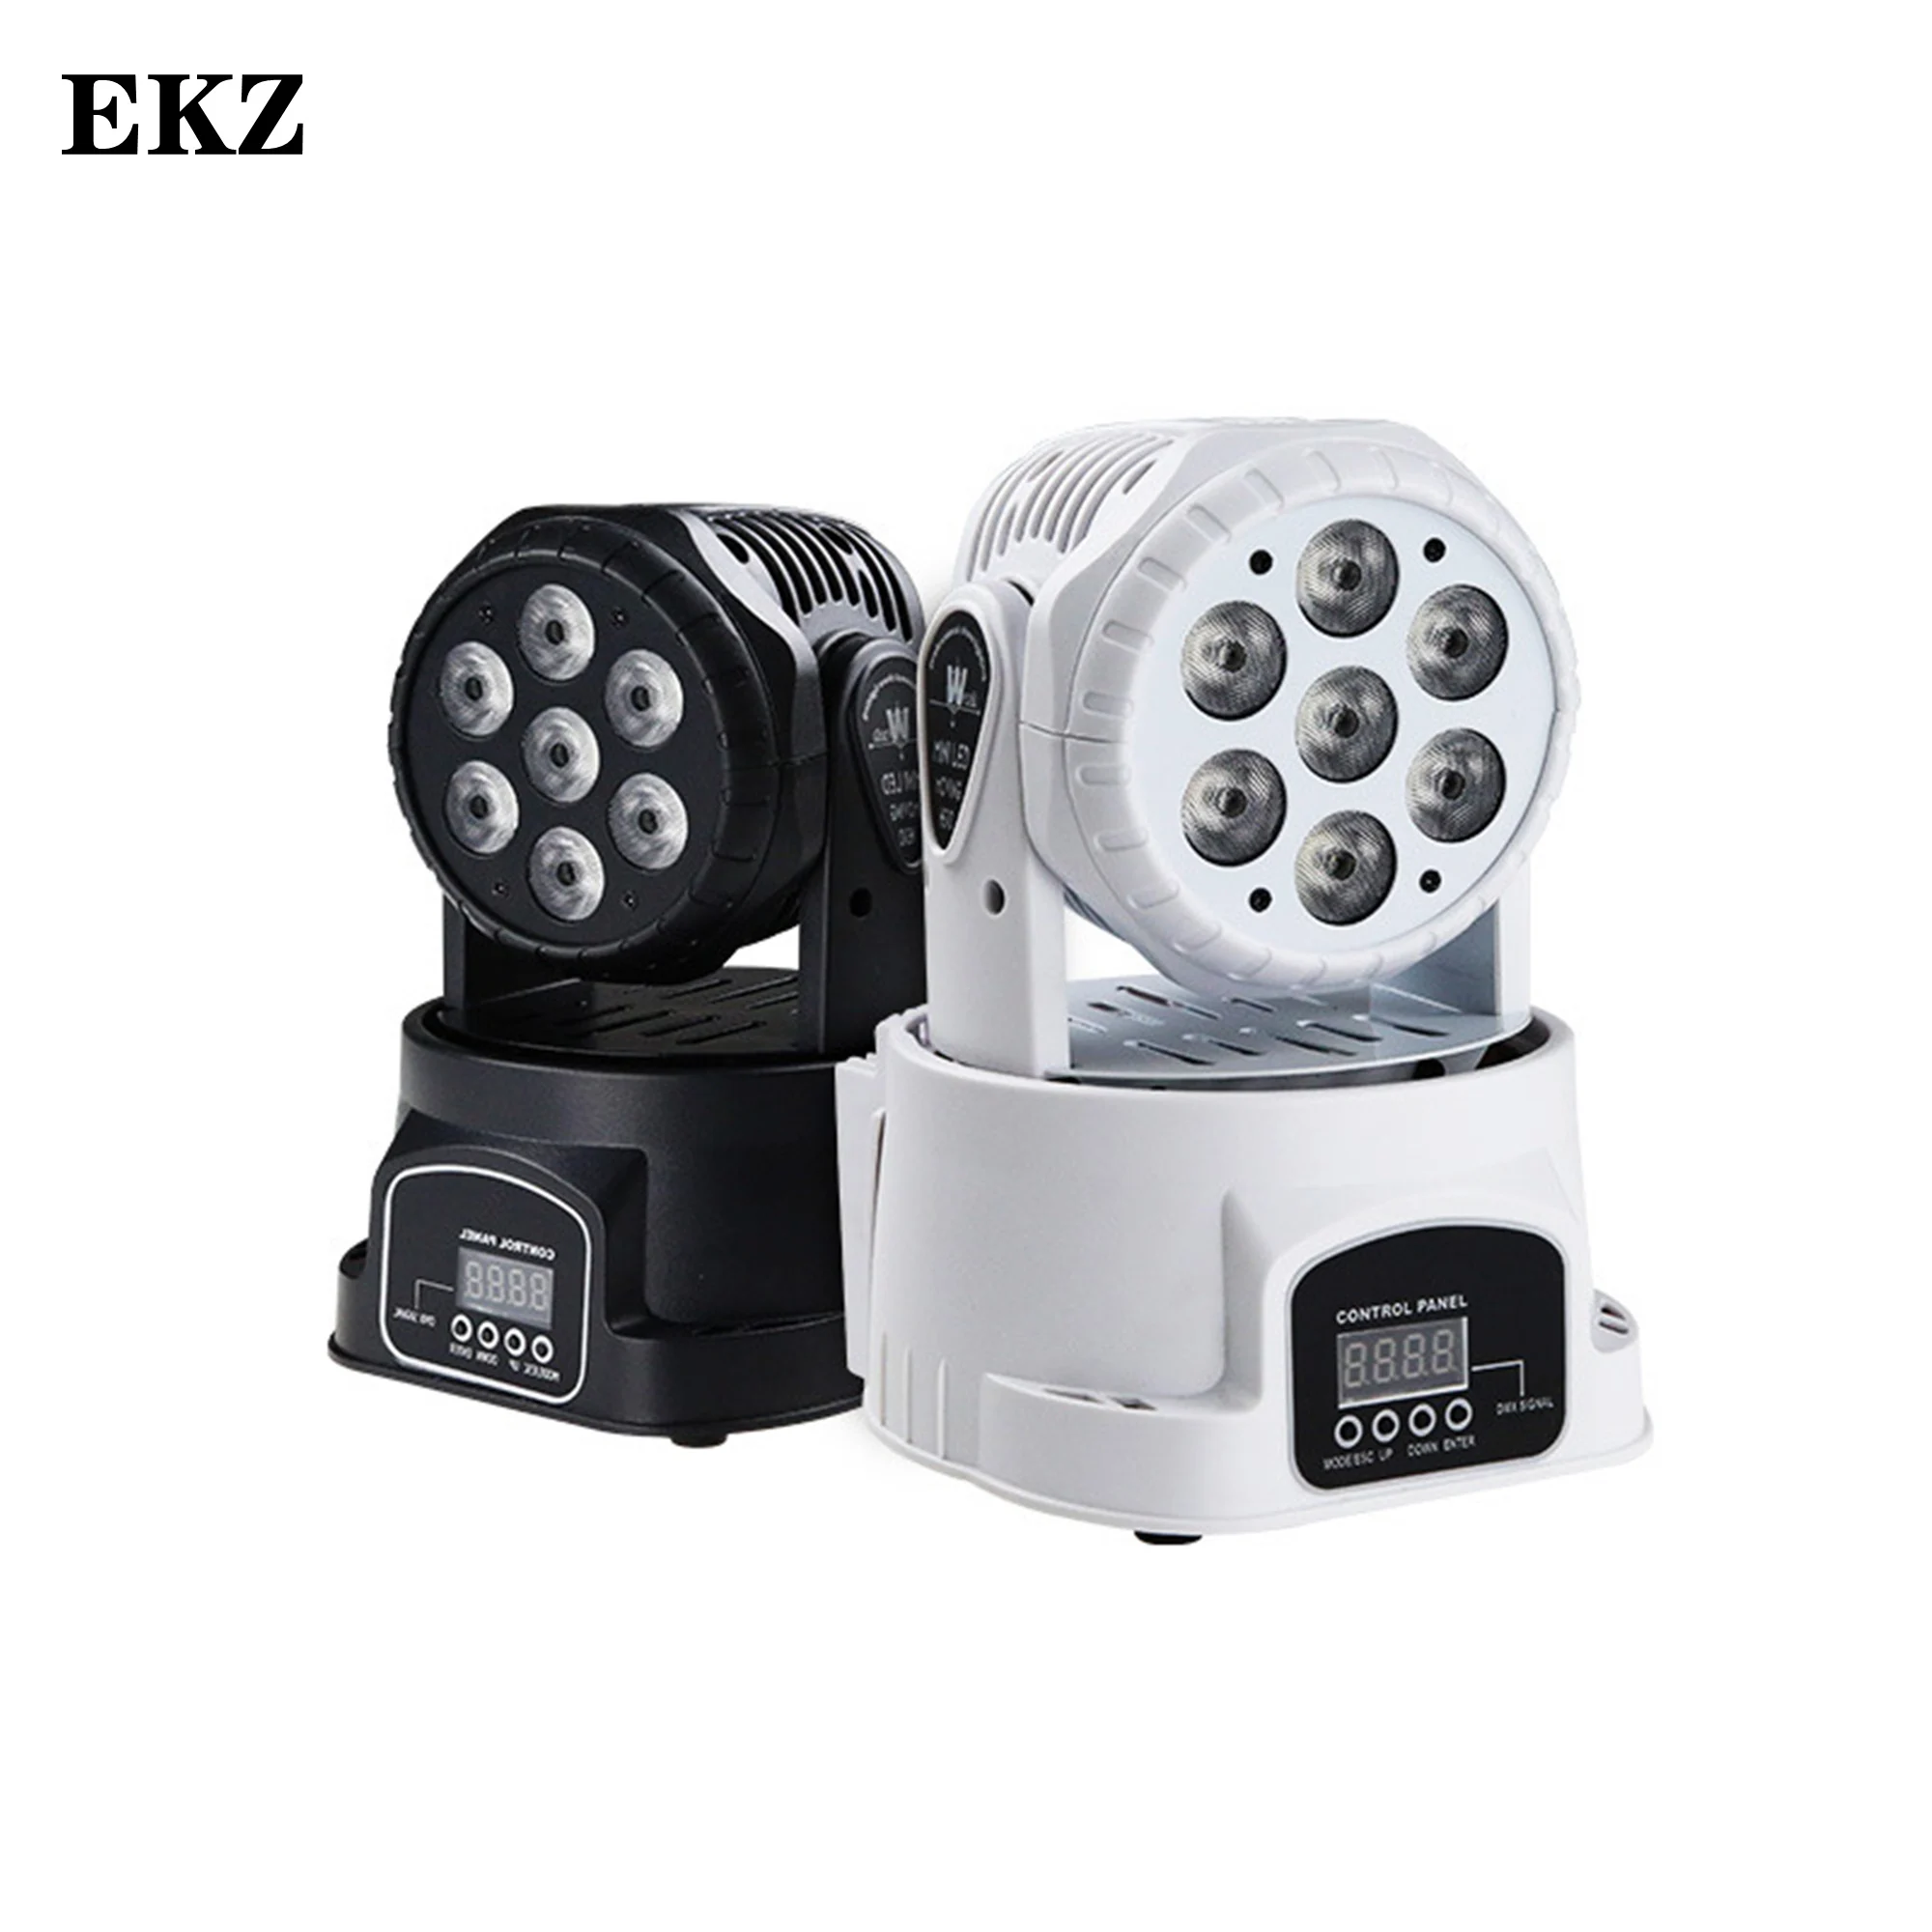 6 in 1 moving head stage light, RGBWA + UV colors, 7x18W, professional for stage effect for disco DJ, music party